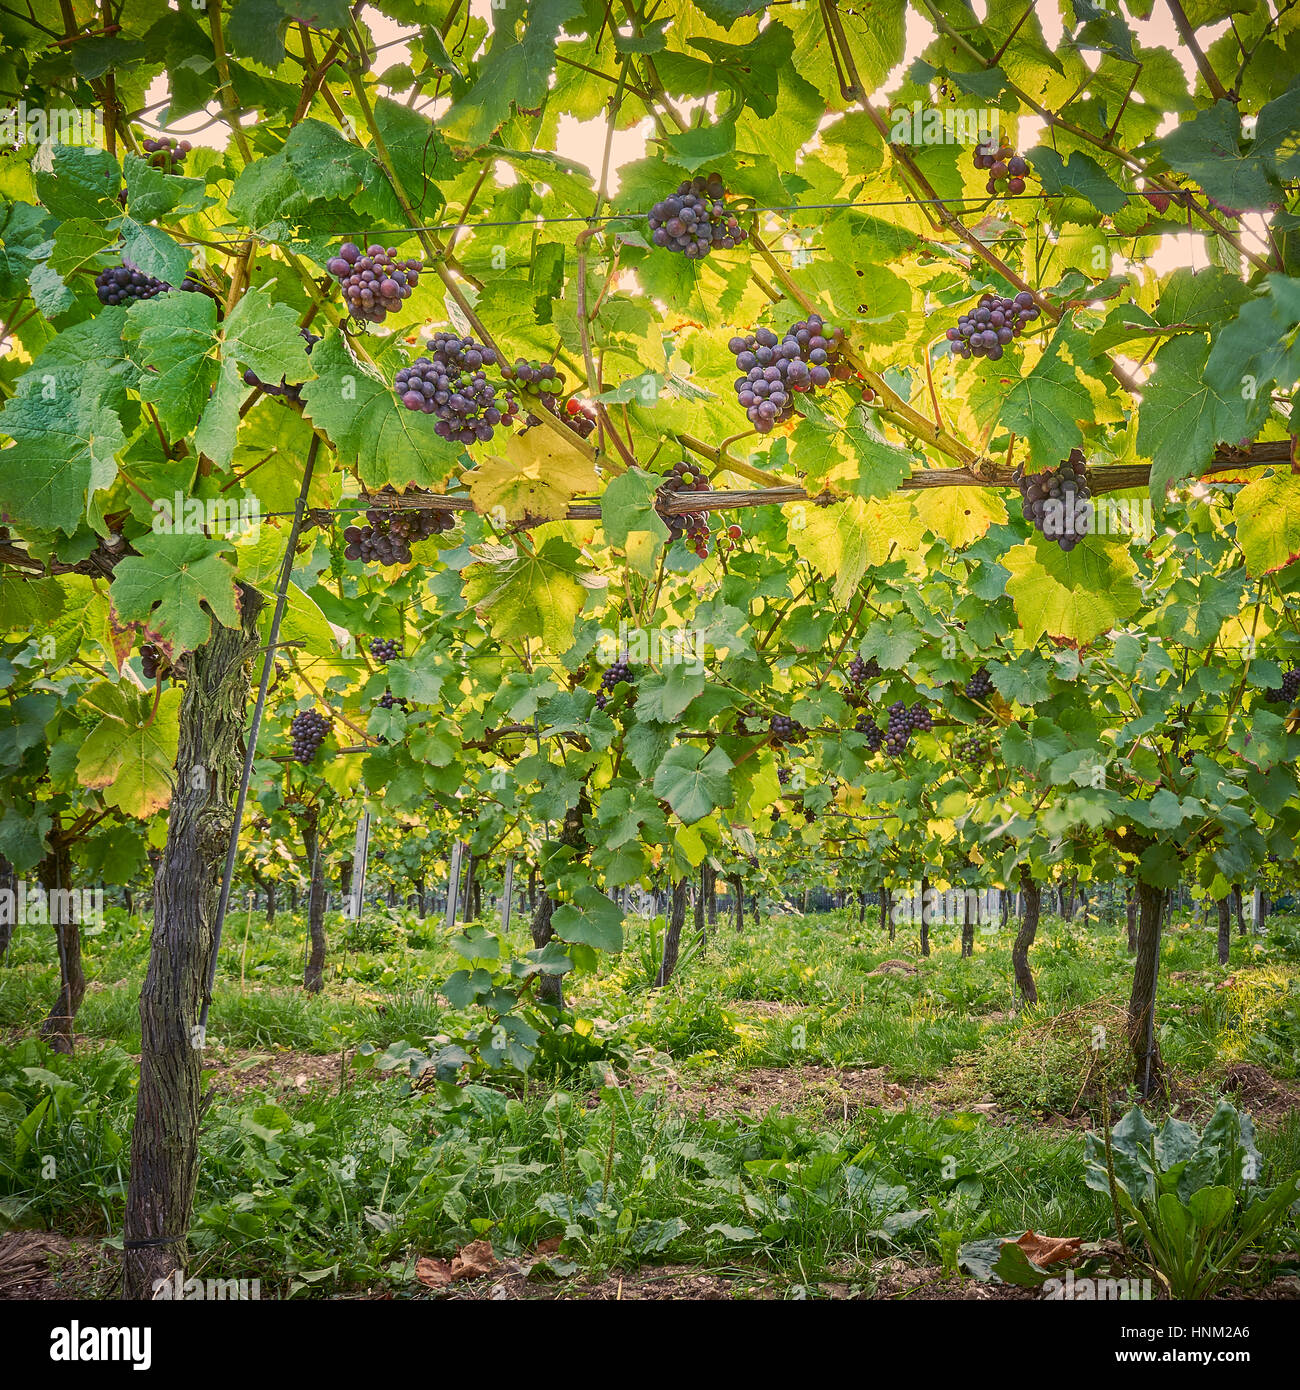 Black grapes growing on the vine in an English vineyard on the South Downs Stock Photo